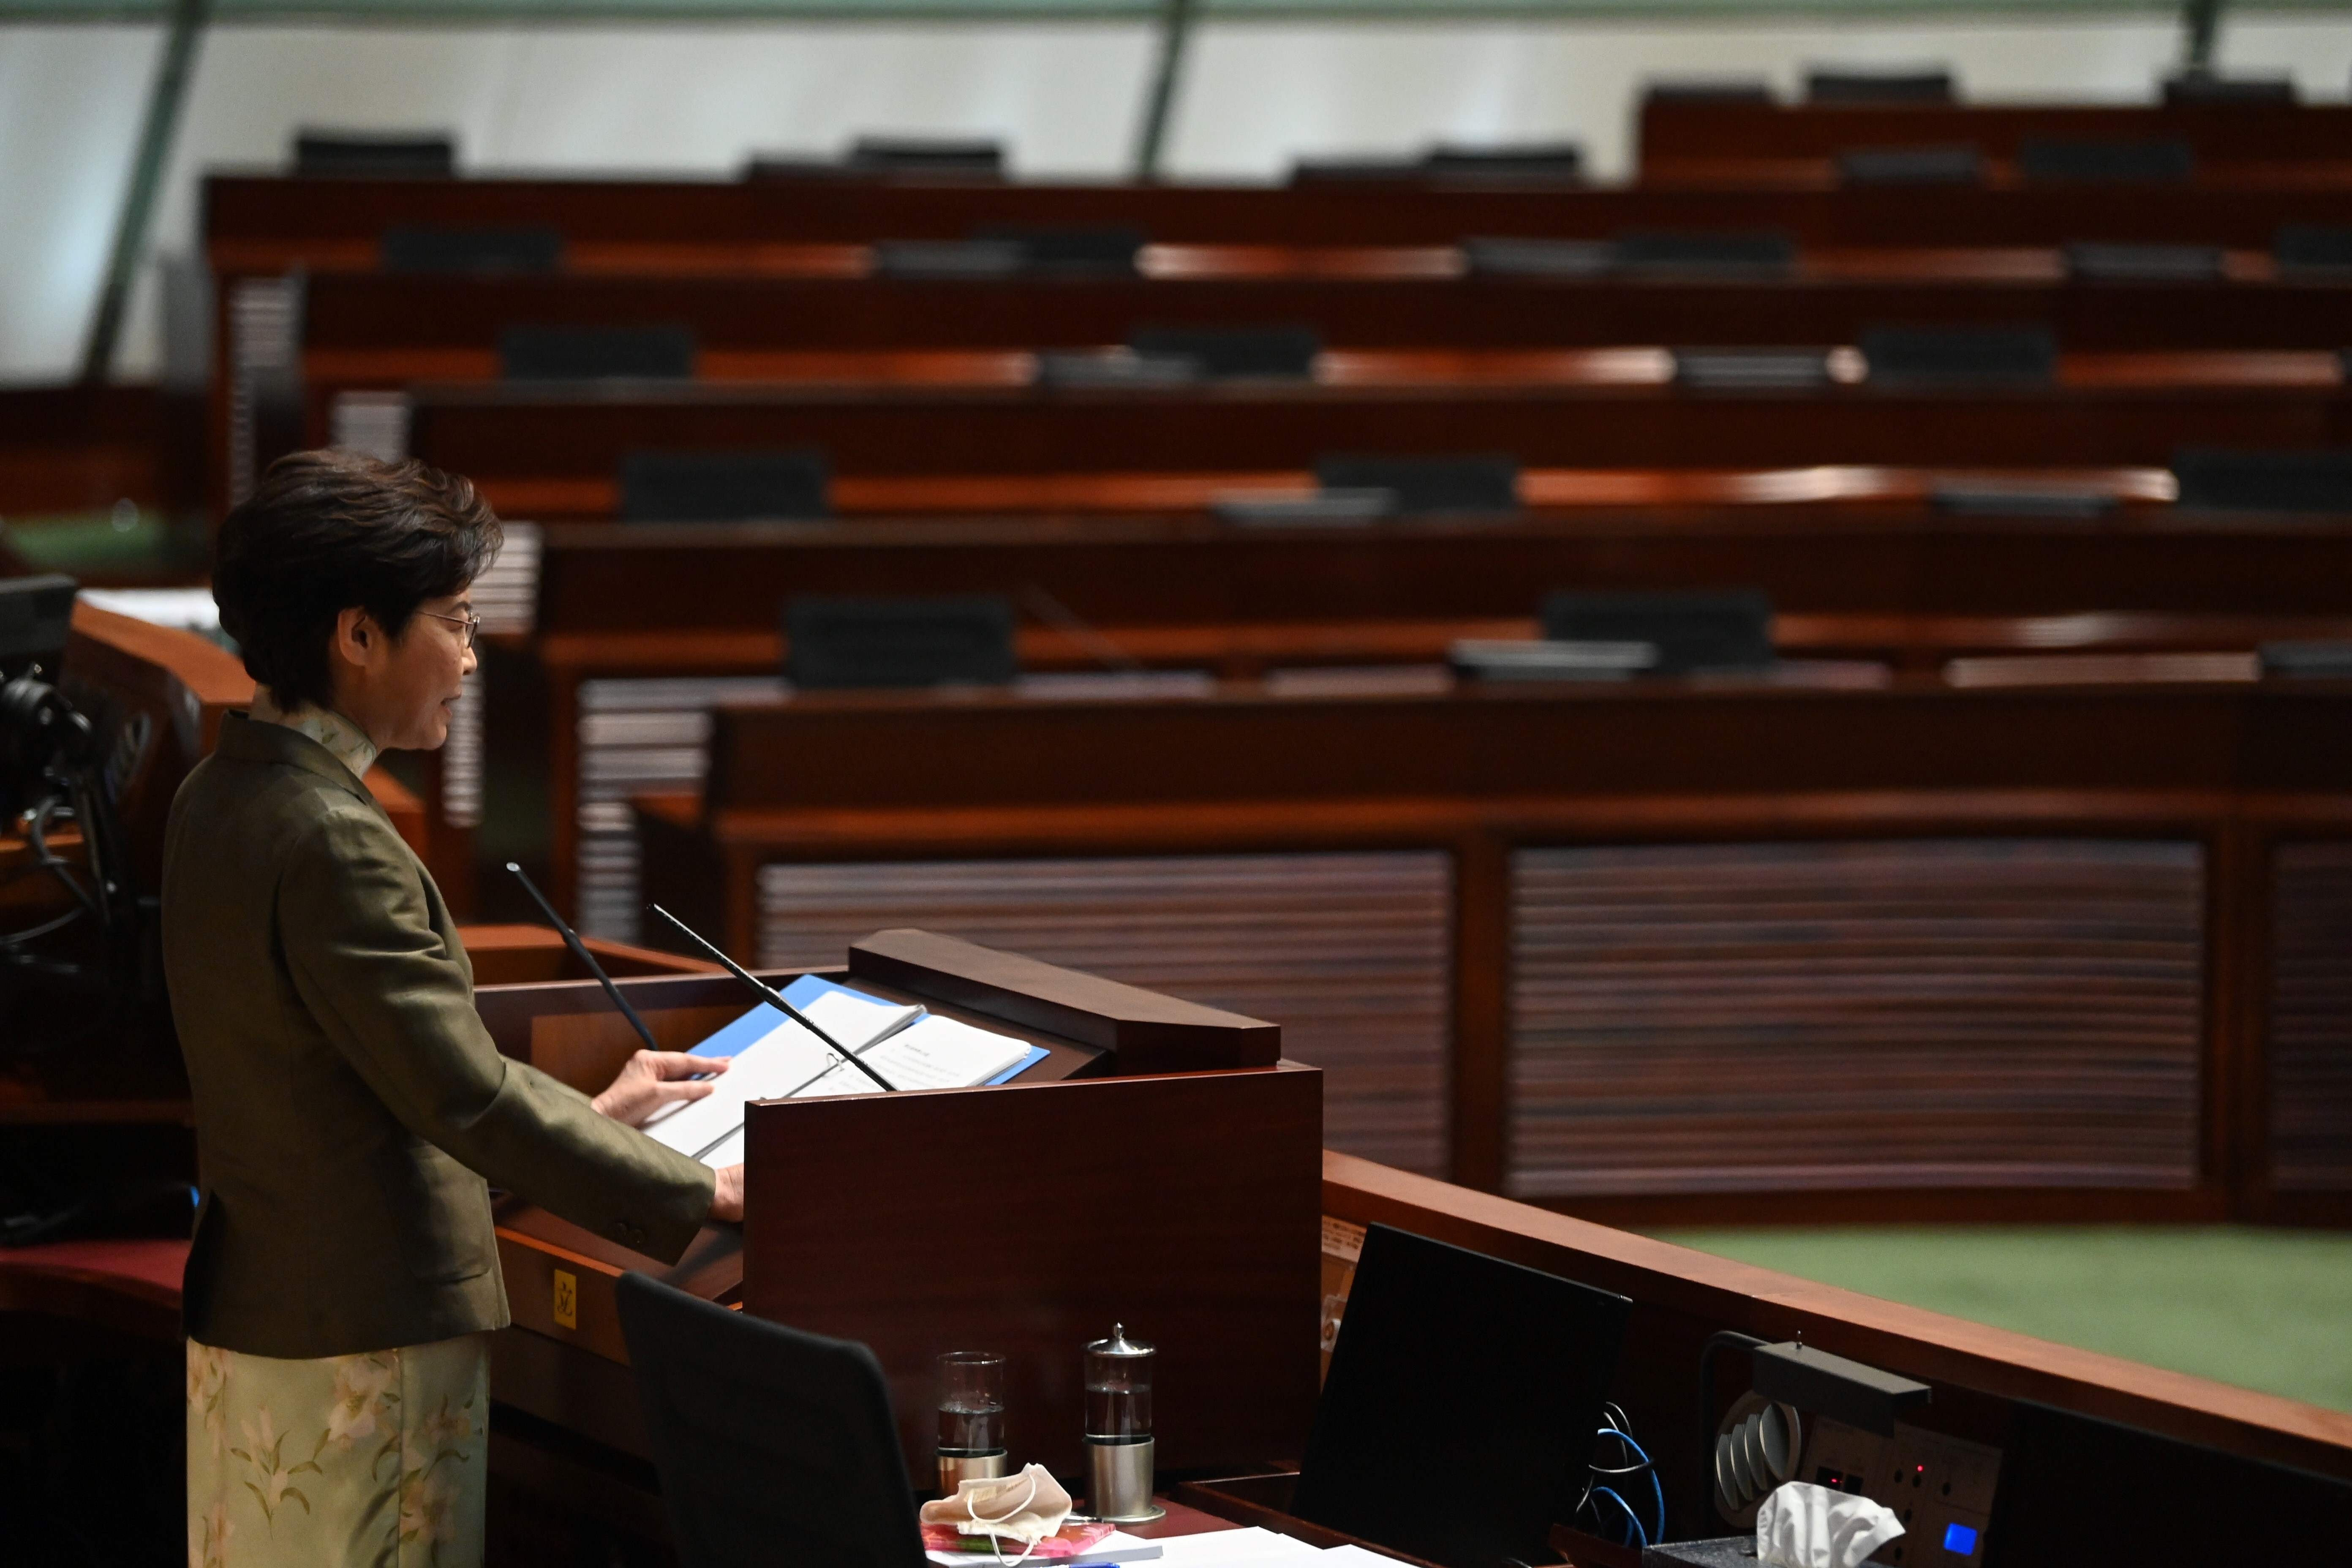 Hong Kong Chief Executive Carrie Lam gives her annual policy address in front of seats once occupied by opposition members. Photo: AFP